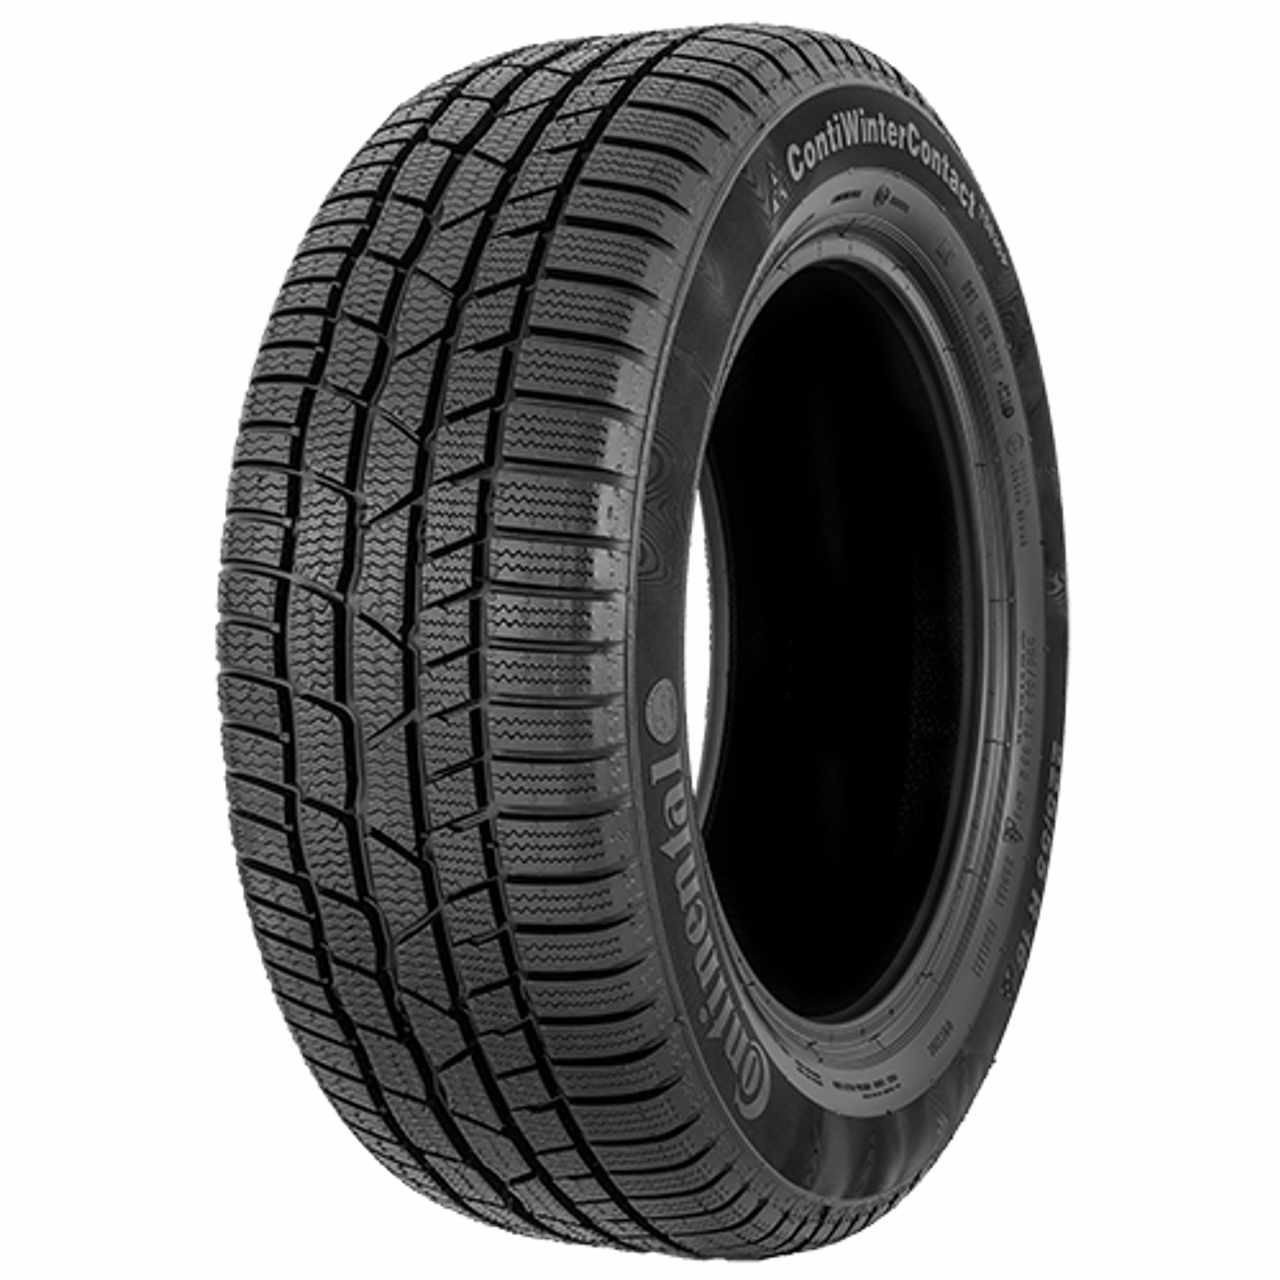 CONTINENTAL CONTIWINTERCONTACT TS 830 P (*) 195/65R16 92H BSW